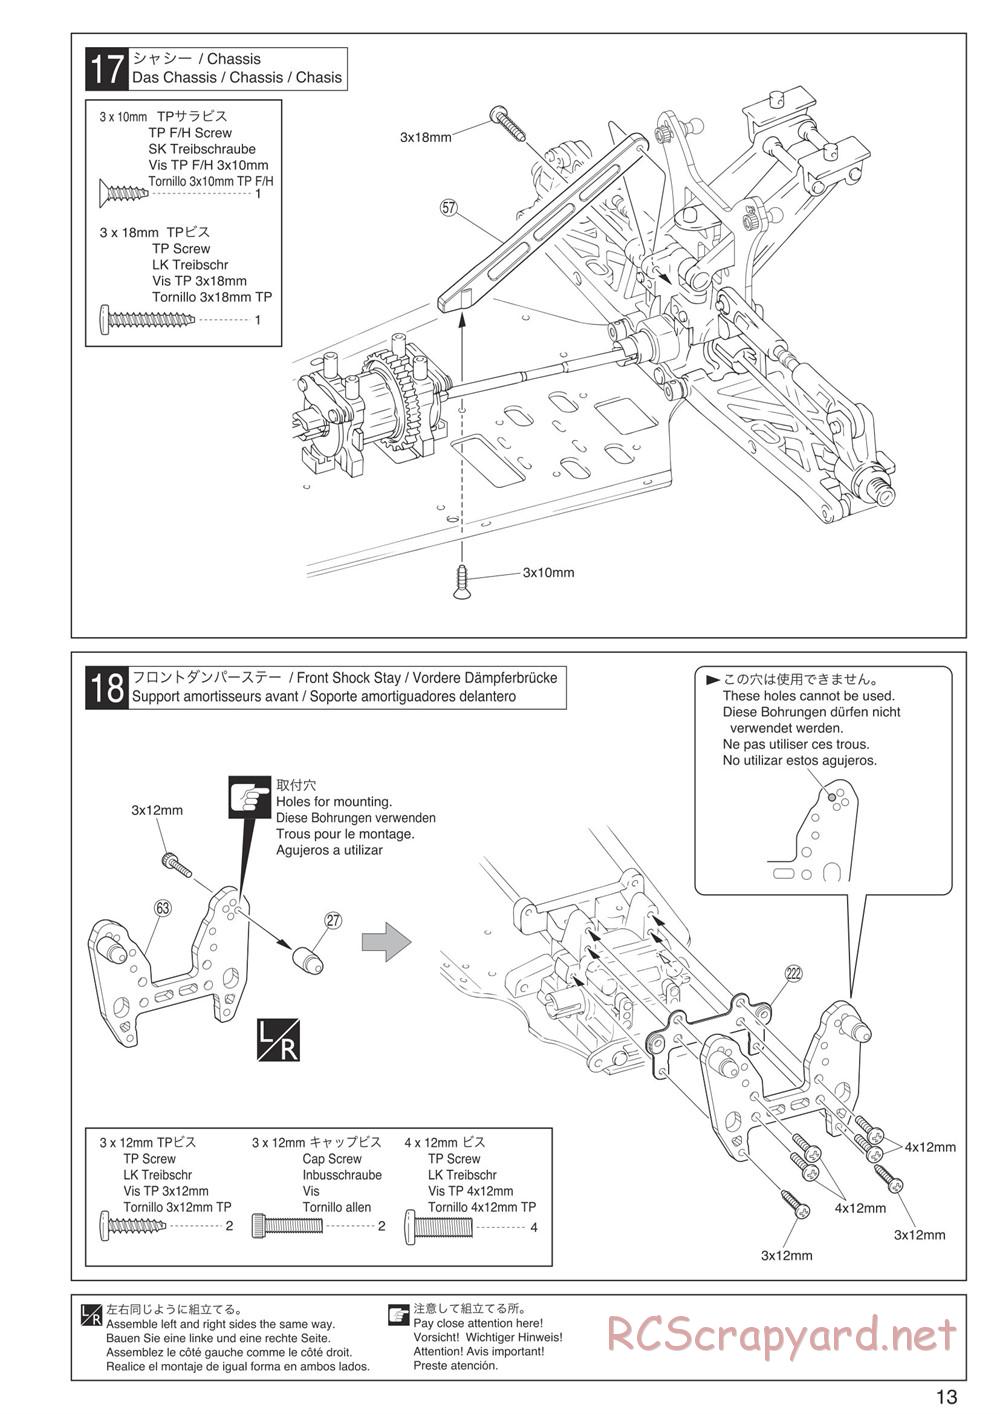 Kyosho - Inferno Neo 3.0 - Manual - Page 13